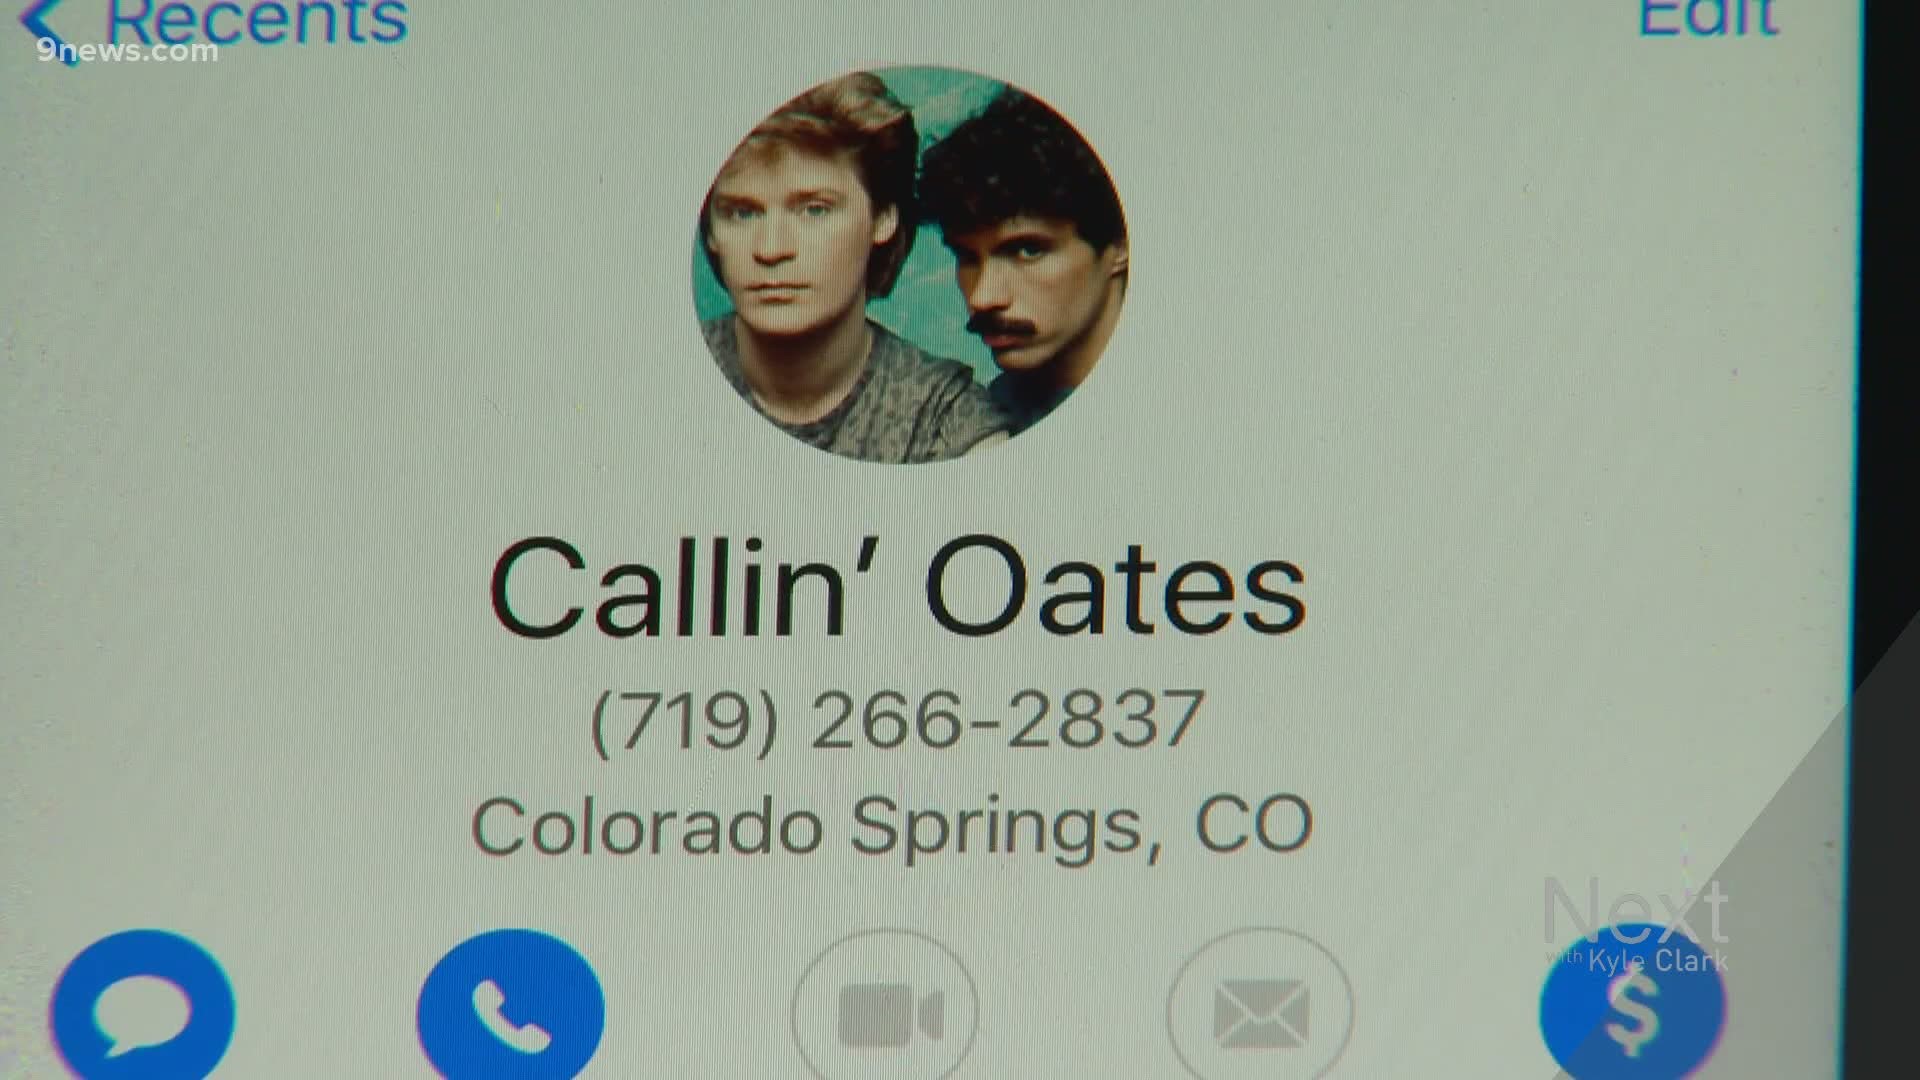 Michael Selvidge created Callin' Oates, a hotline for Hall and Oates music, years ago with a Colorado phone number.